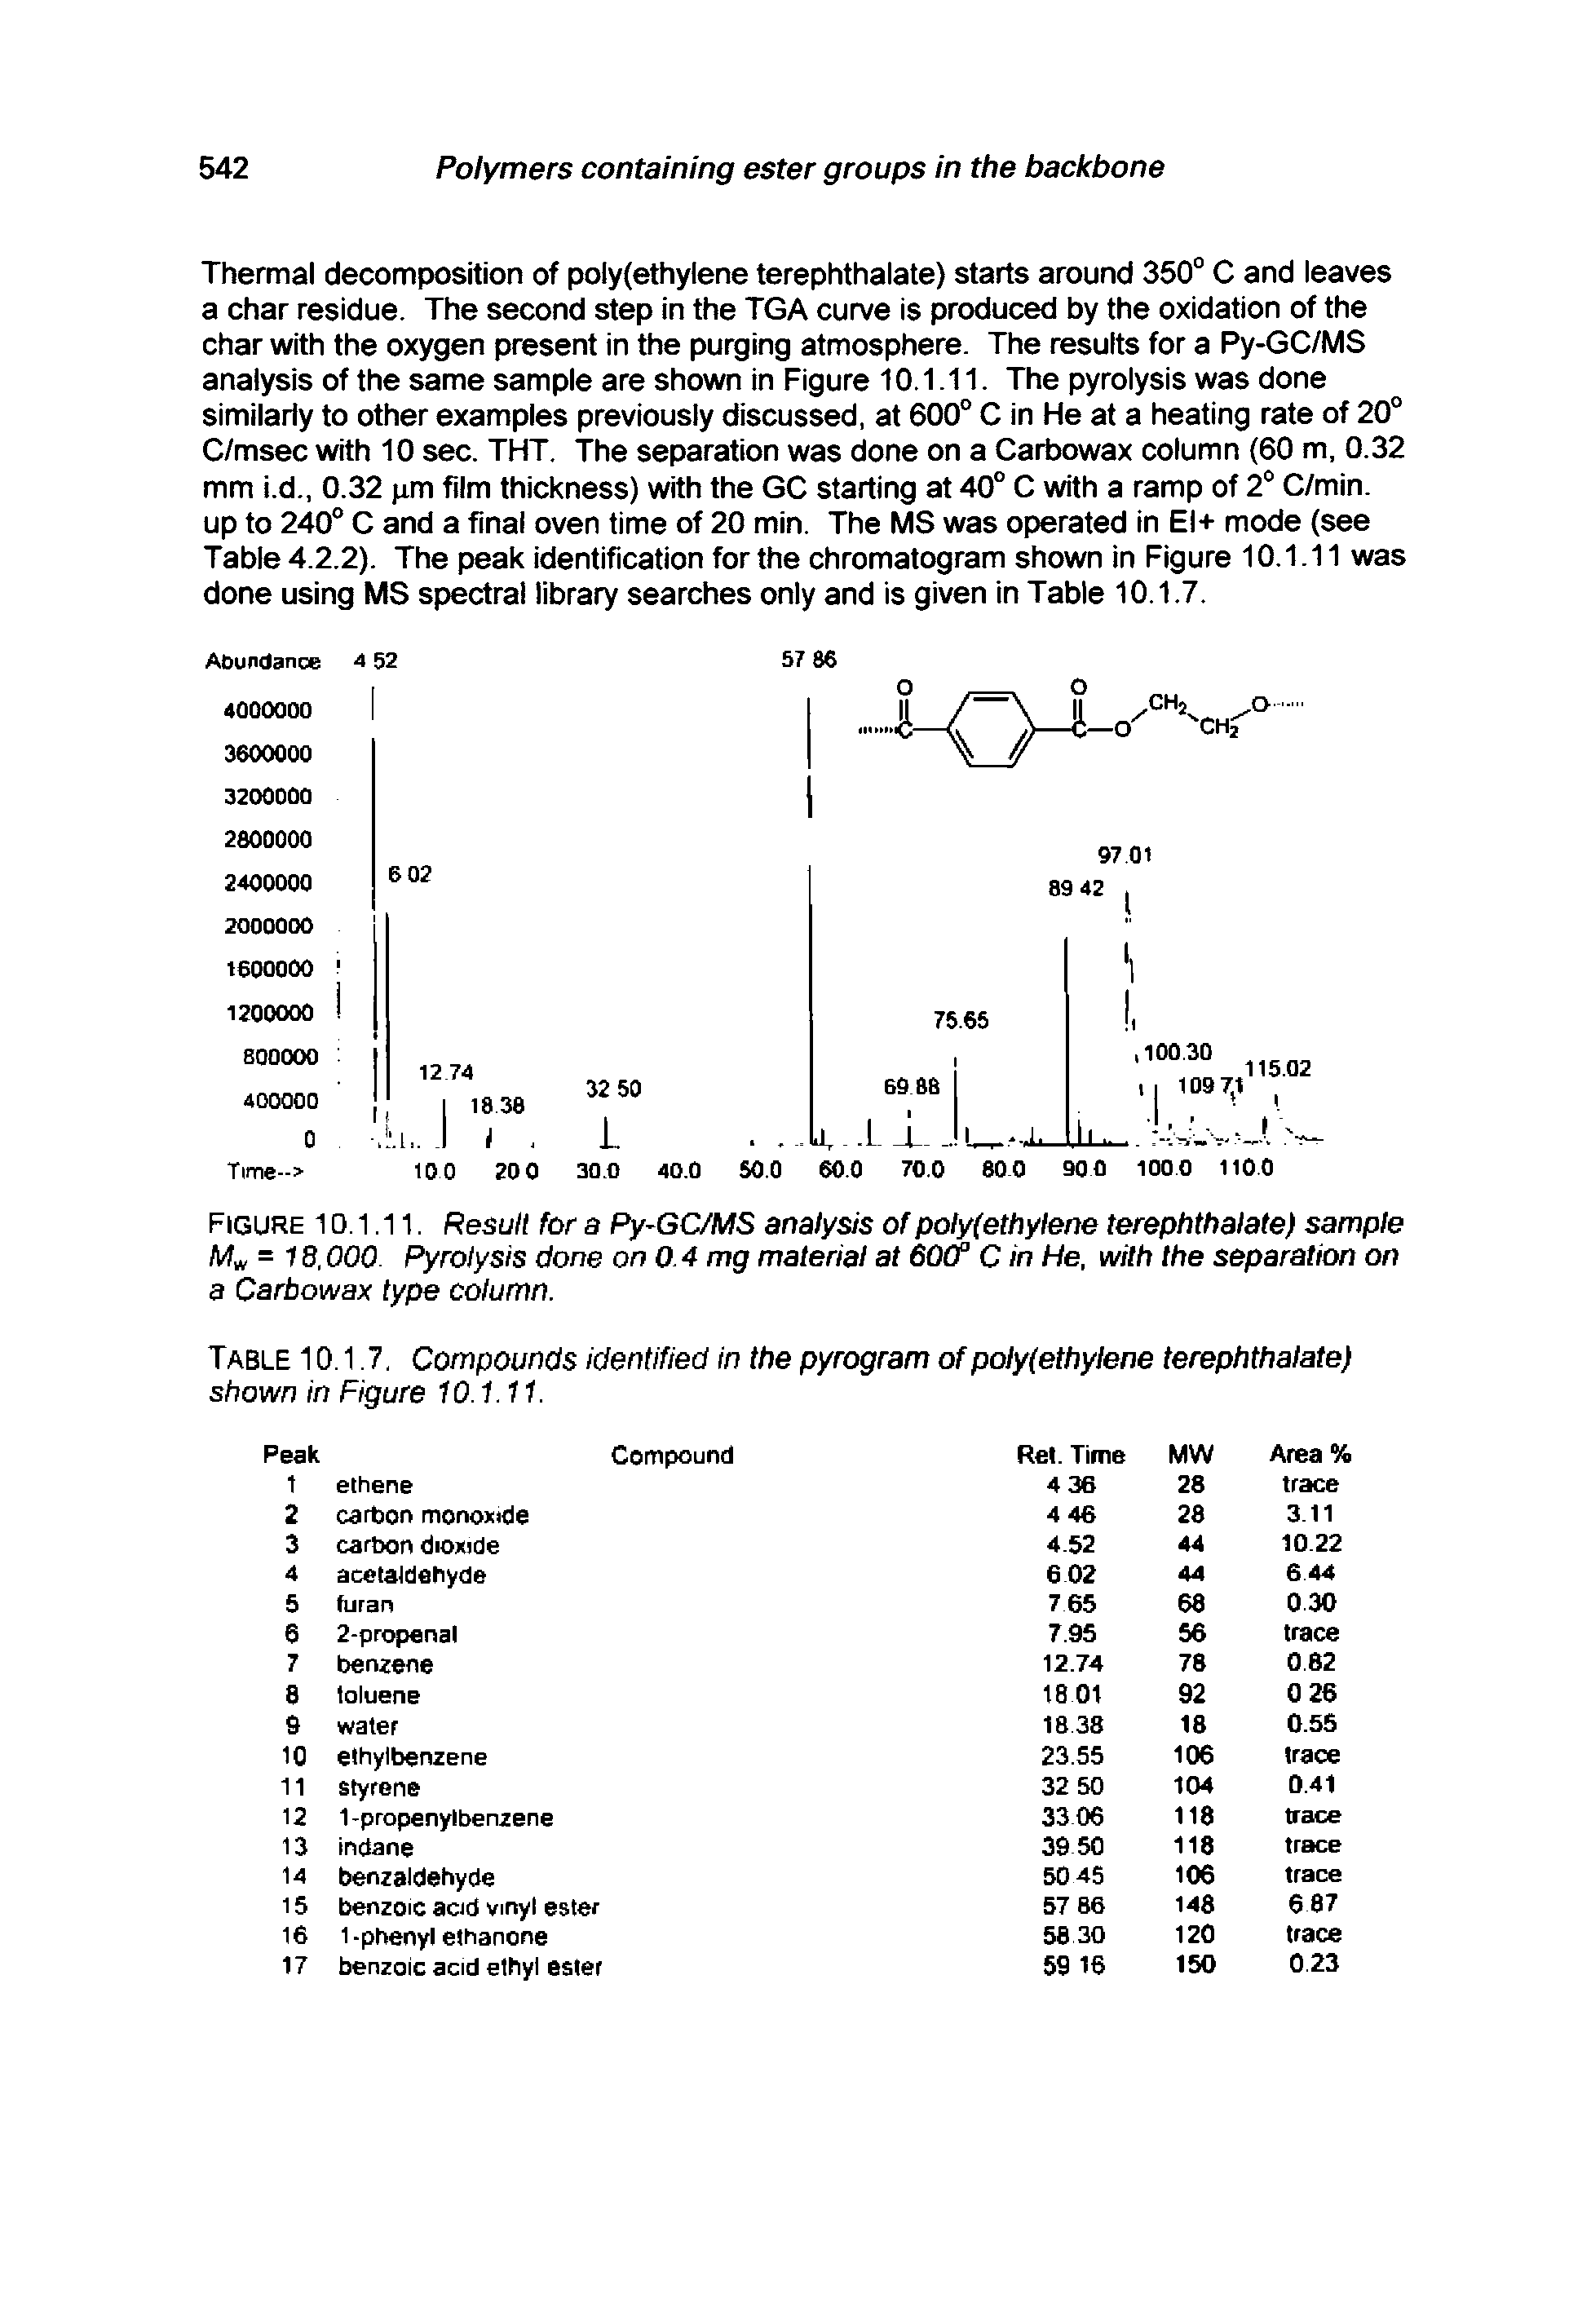 Figure 10.1.11. Result for a Py GC/MS analysis of polyfethylene terephthalate) sample Mm = 18,000. Pyrolysis done on 0 4 mg material at 60(f C in He, with the separation on a Carbowax type column.